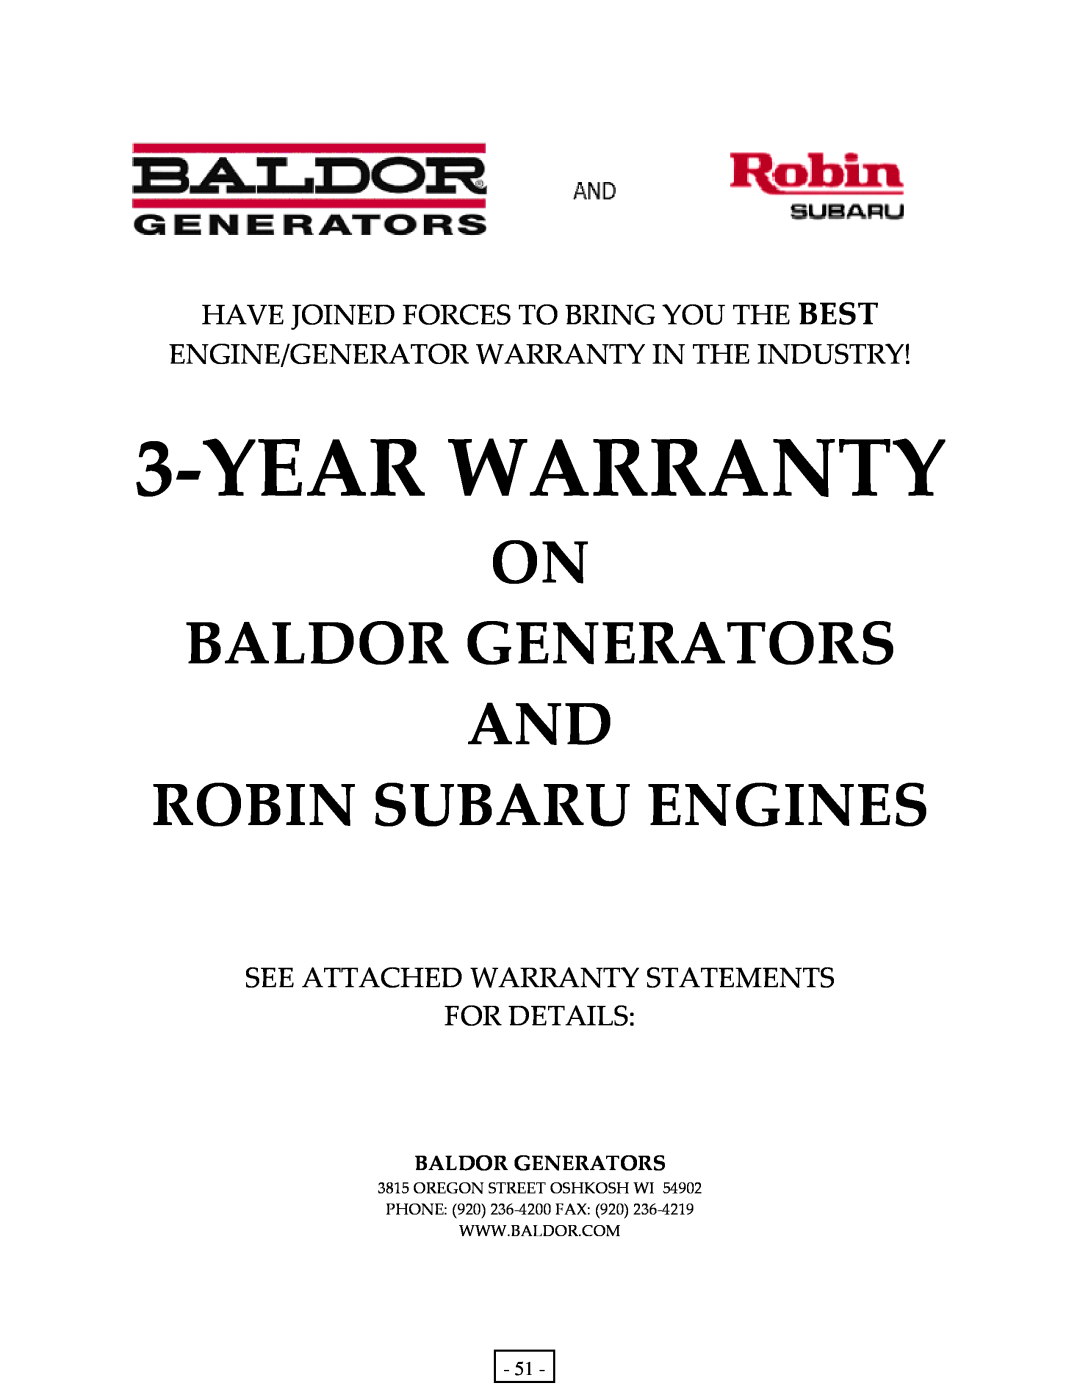 Baldor BALDOR GENERATOR Have Joined Forces To Bring You The Best, Engine/Generator Warranty In The Industry, Year Warranty 